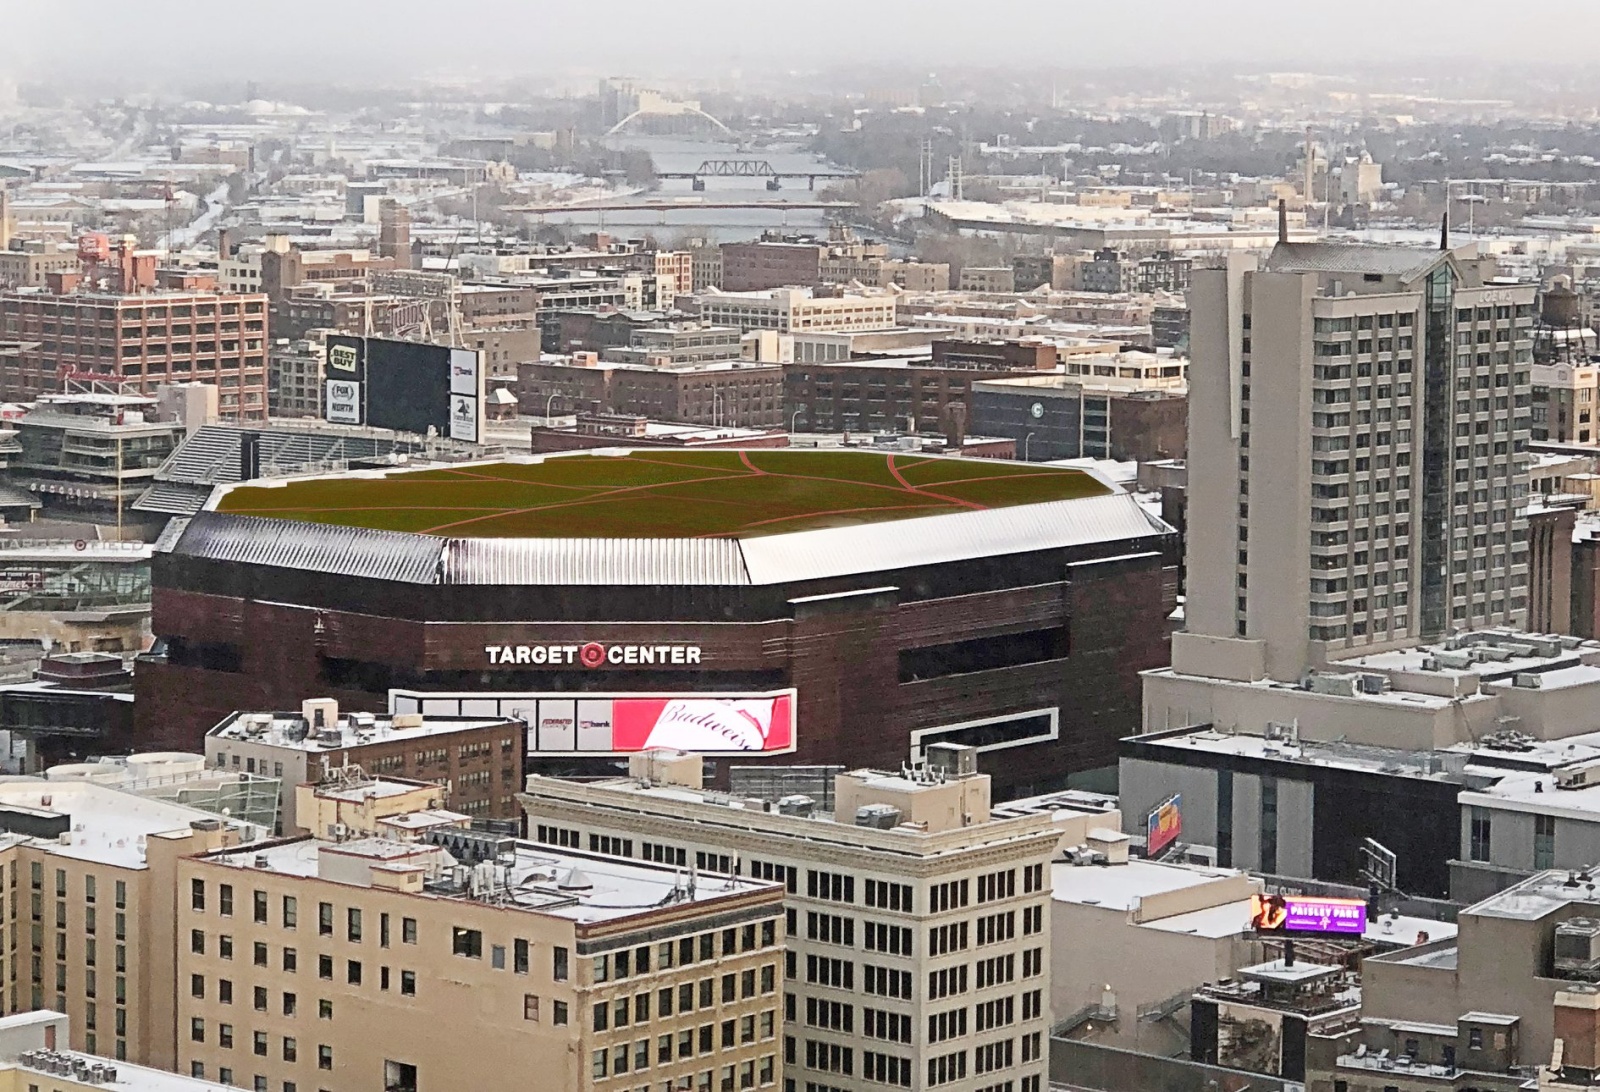 City of Minneapolis Target Center Arena Featured Image